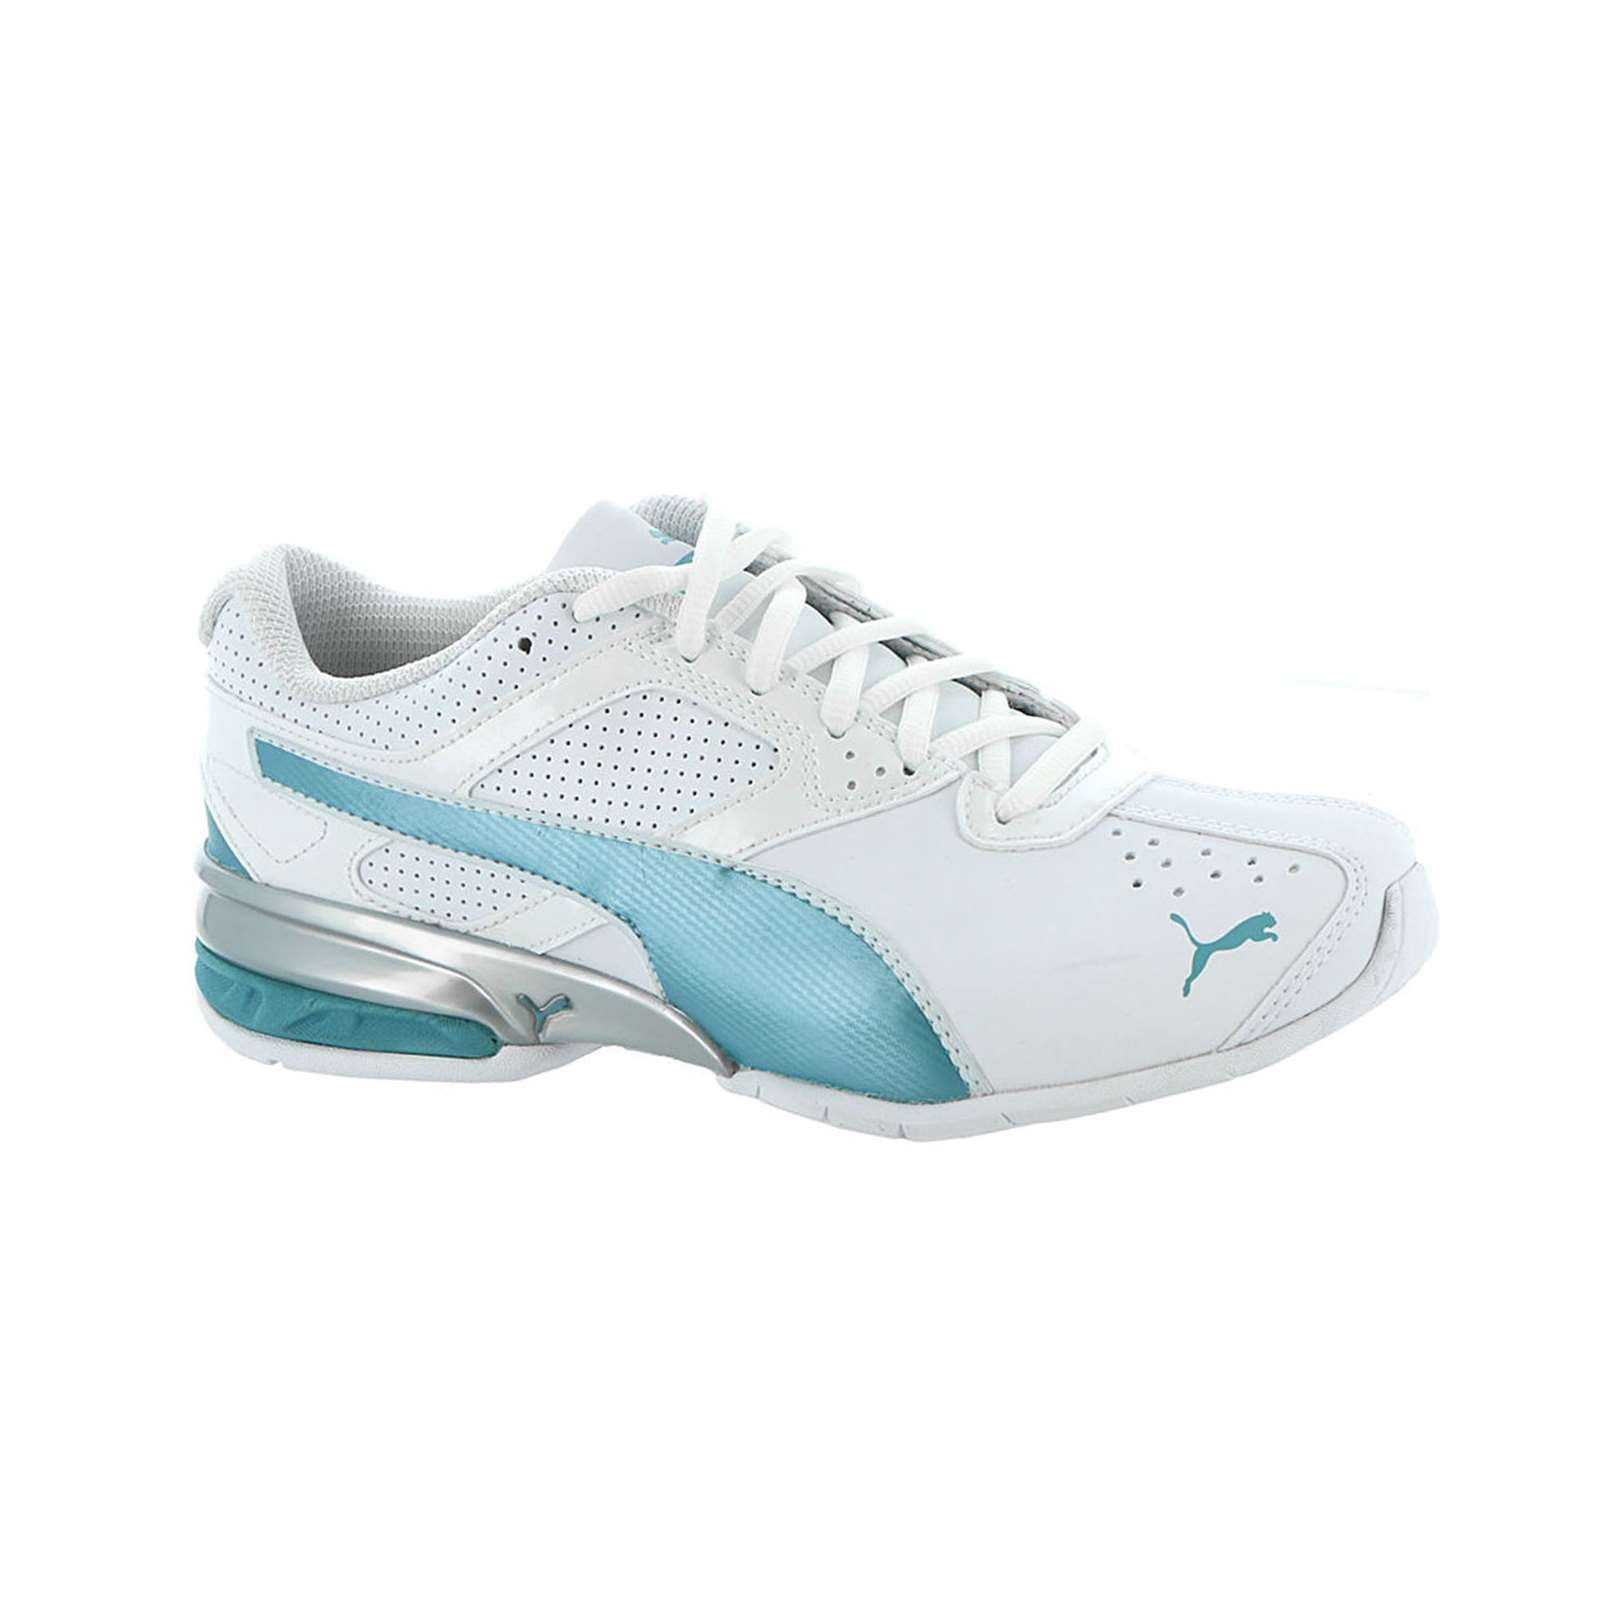 PUMA - Puma Womens Athletic Classic Shoes Tazon 6 Lace Up Sneakers ...